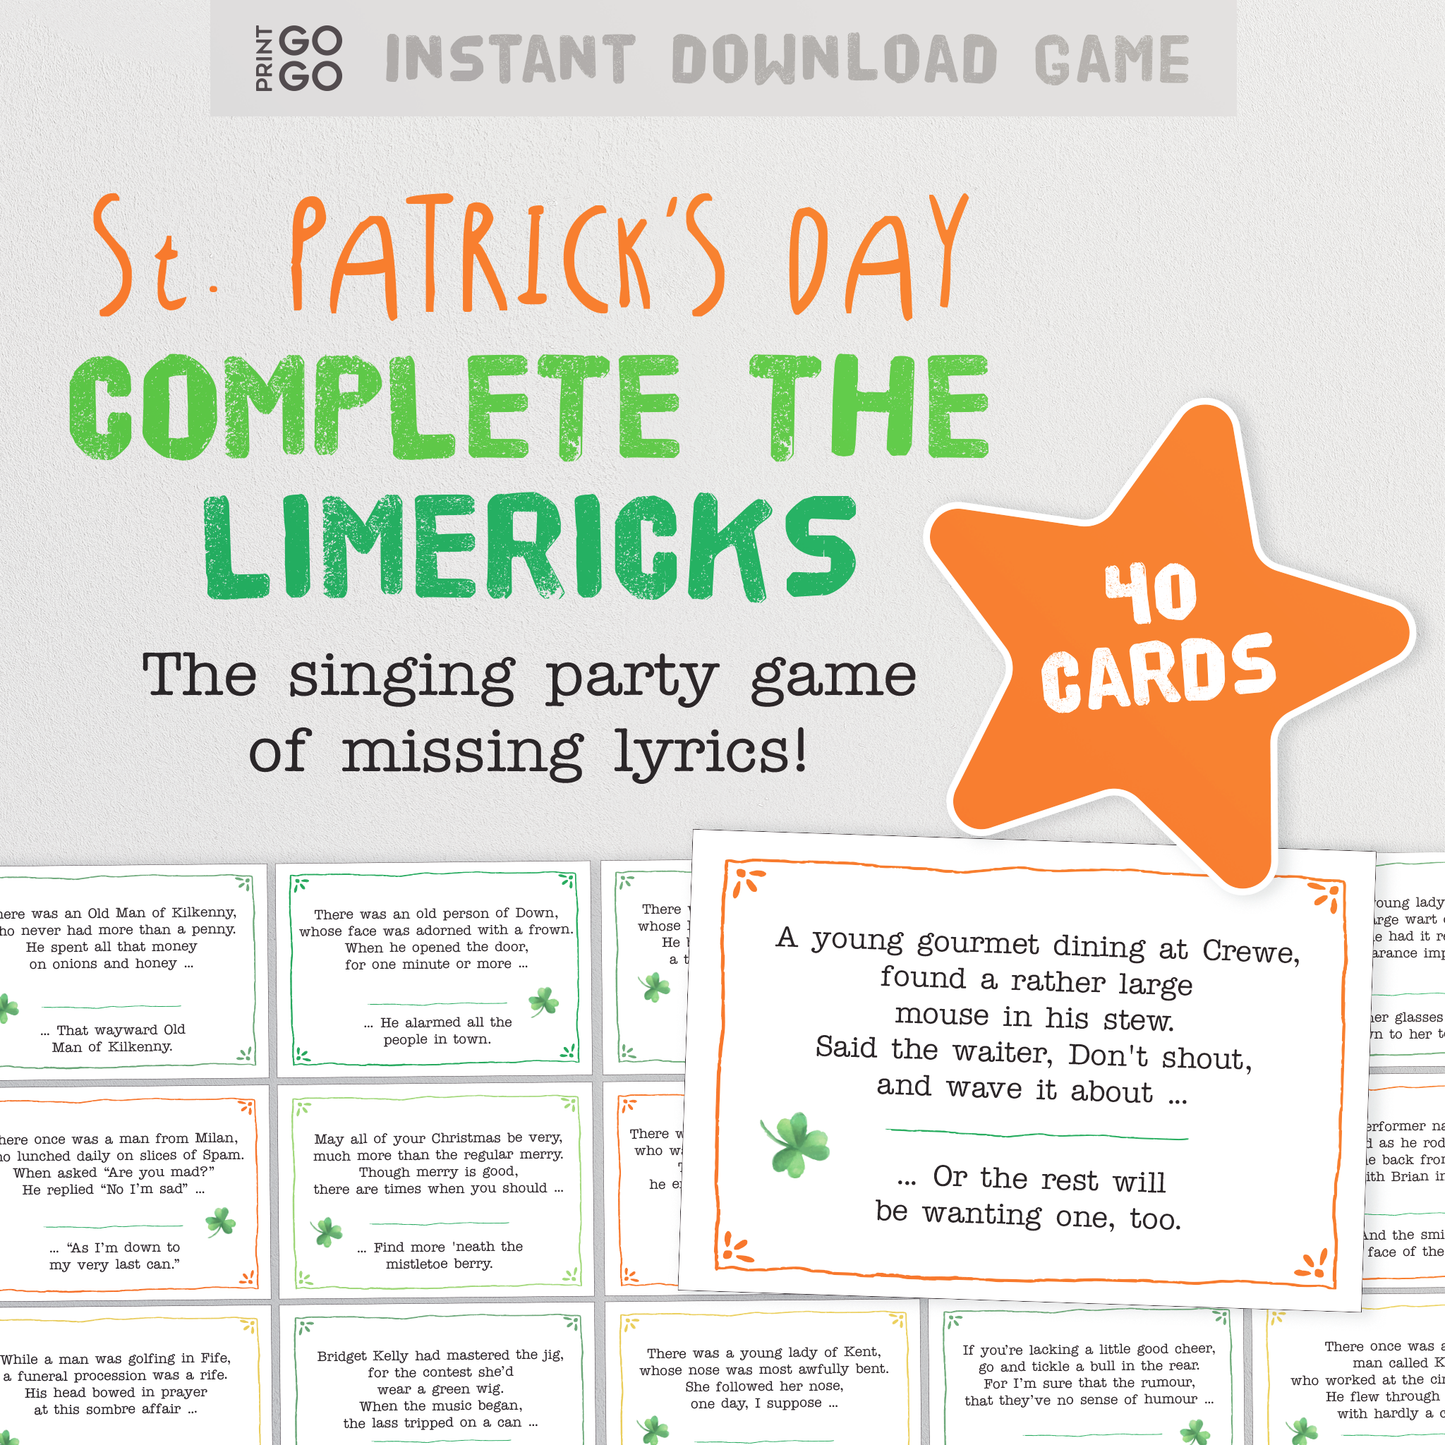 St. Patricks Day Complete The Limericks - The Quick Thinking Party Game